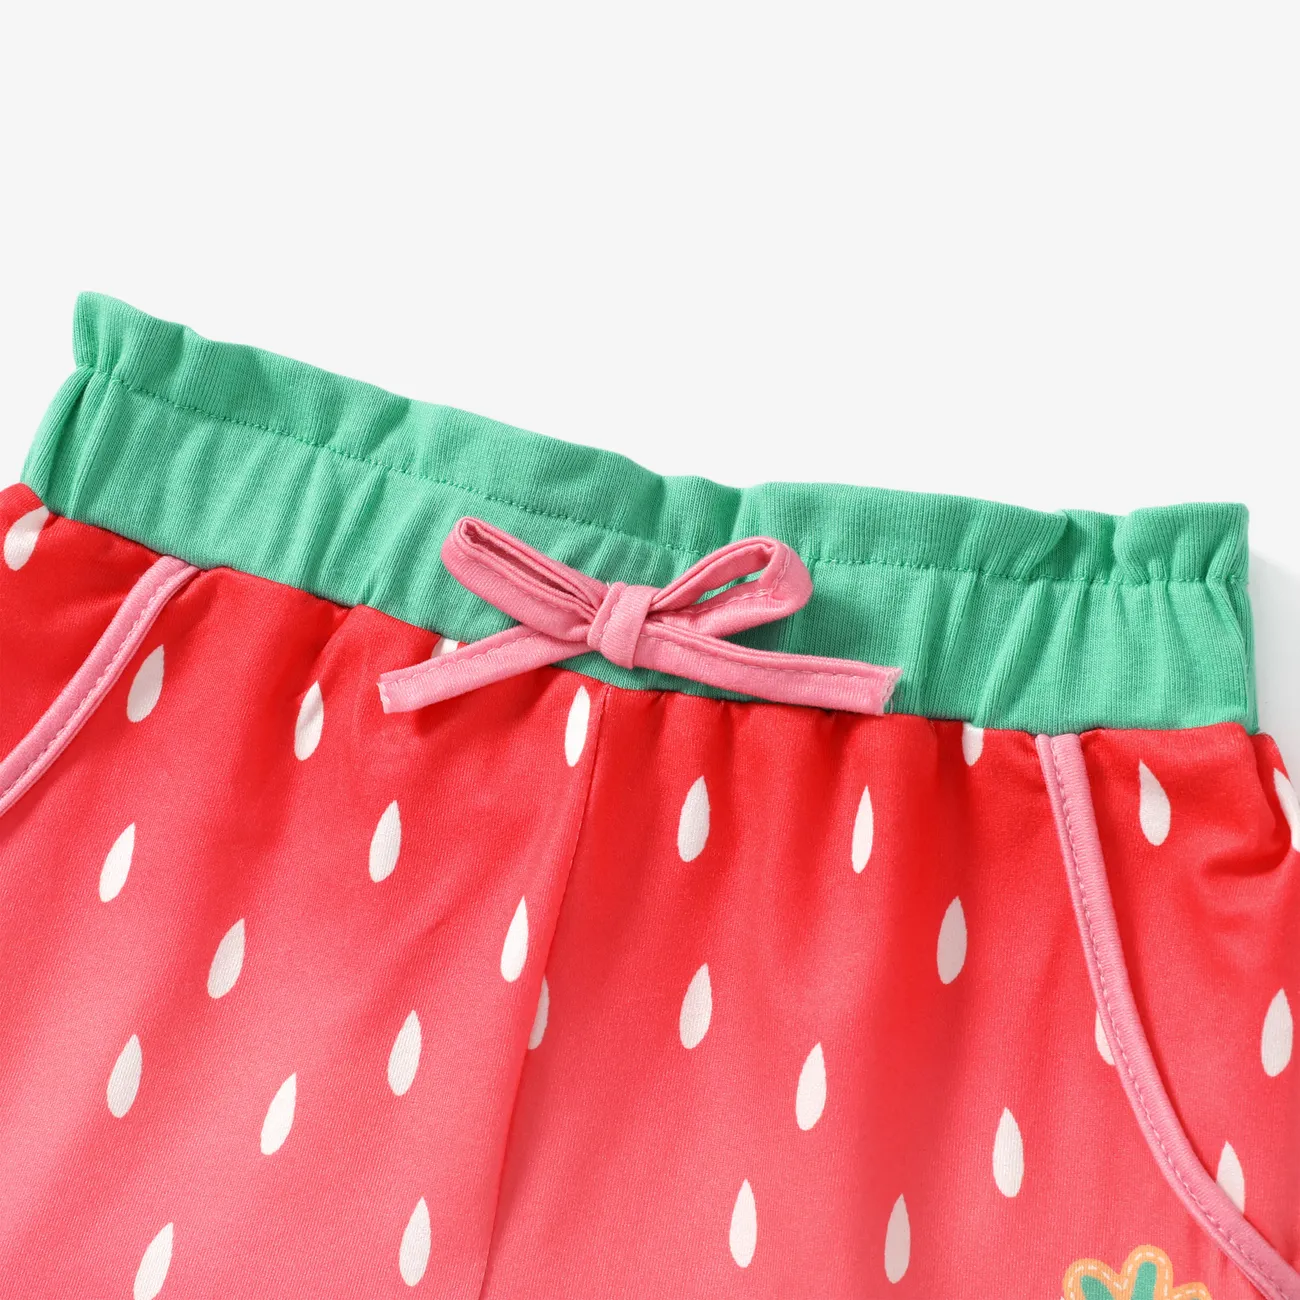 Peppa Pig Toddler Girls 2pcs Strawberry Character Print Flutter-sleeve Top with Shorts Set  Watermelonred big image 1